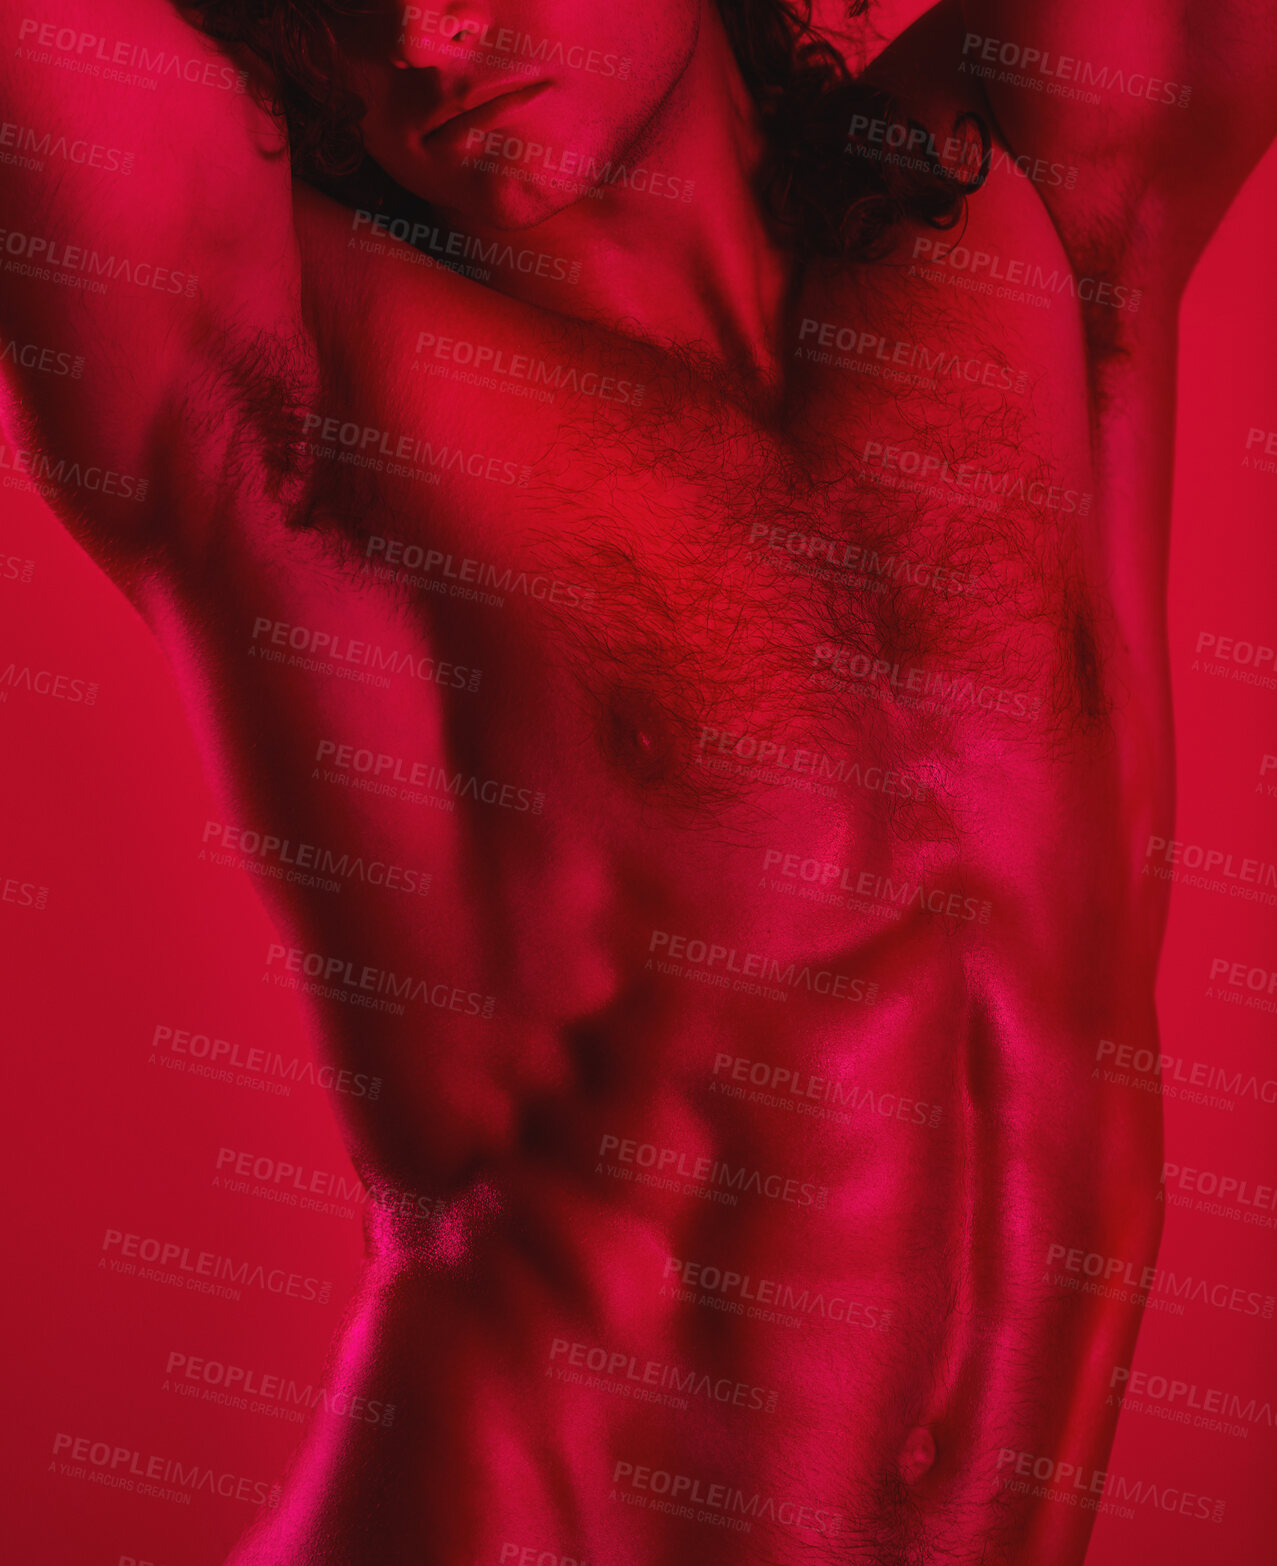 Buy stock photo Studio shot of a muscular young man posing shirtless against a red background